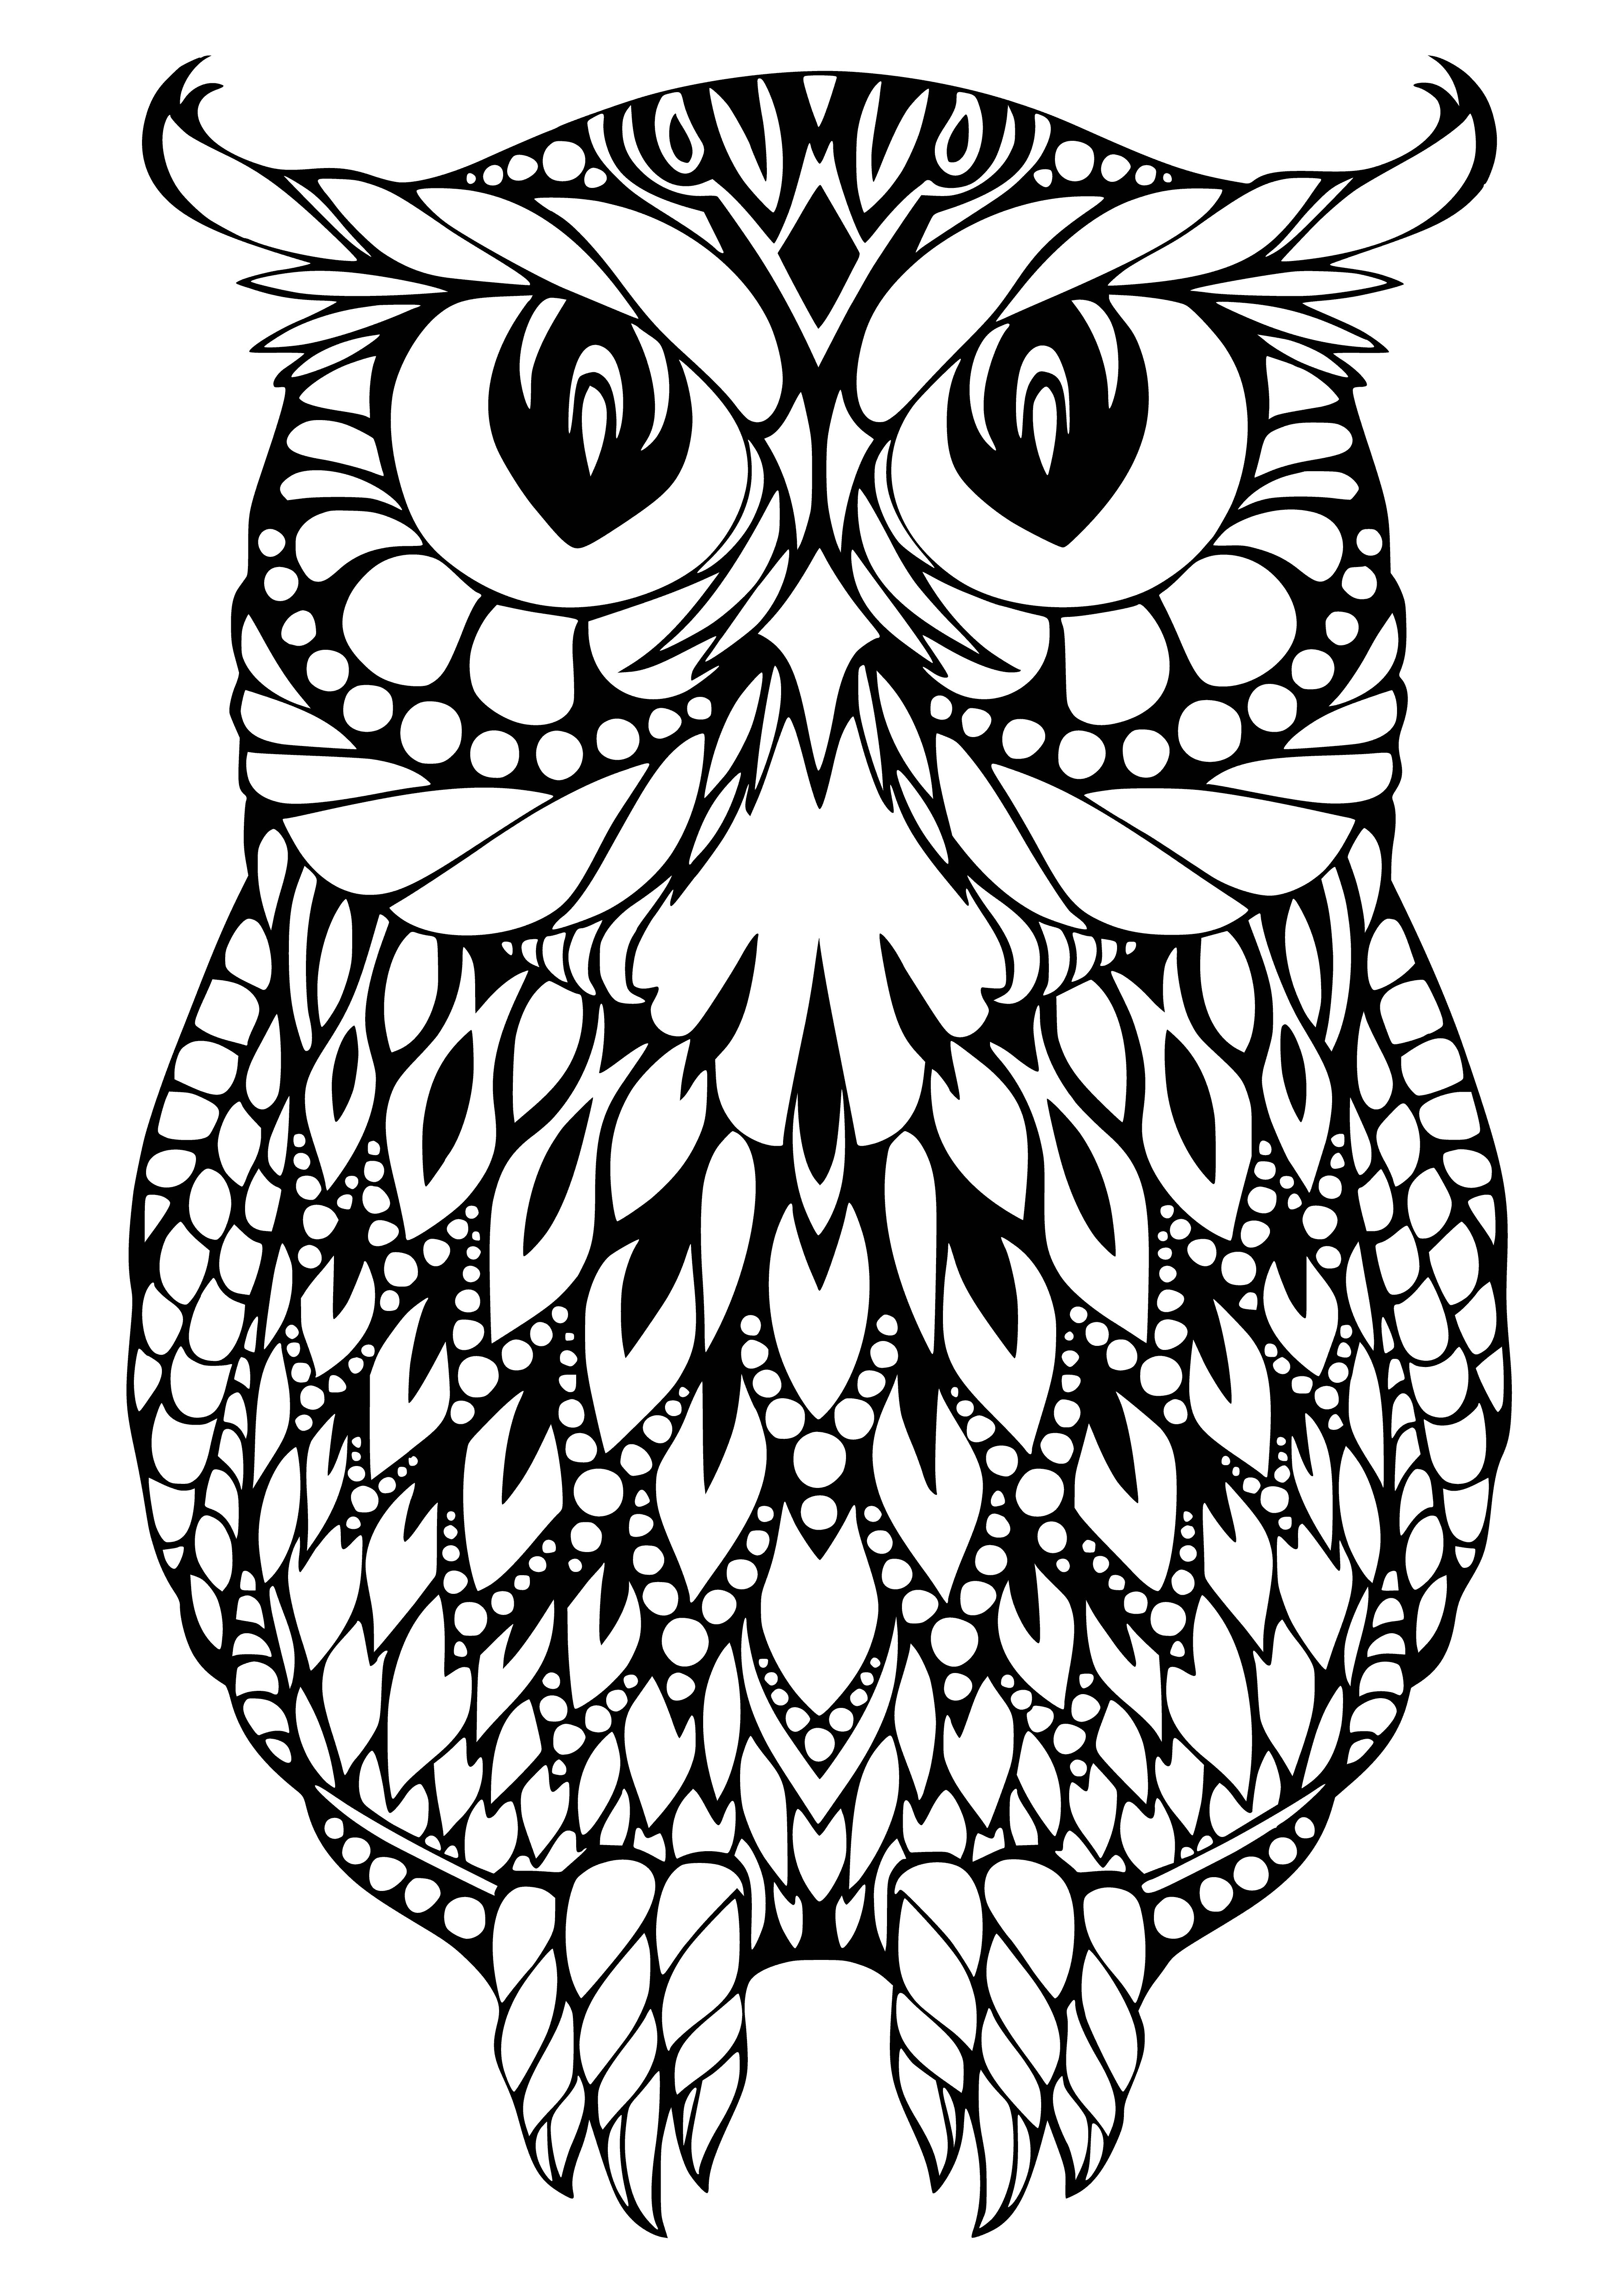 coloring page: Two differently-sized owls with big round eyes perched on branches with leaves in Antistress Owls coloring pages.